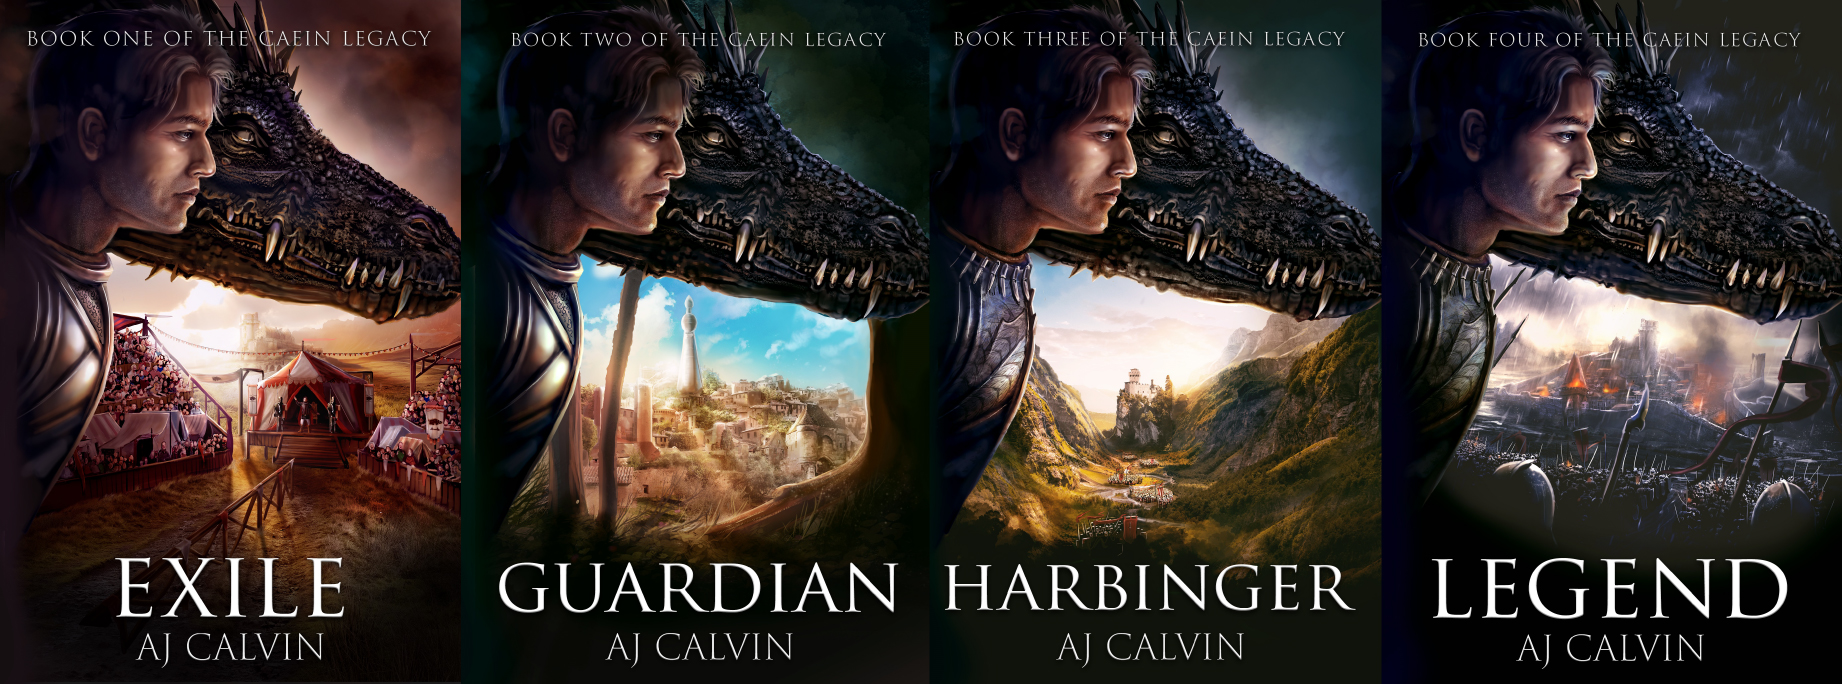 The Cover Art Process: The Caein Legacy